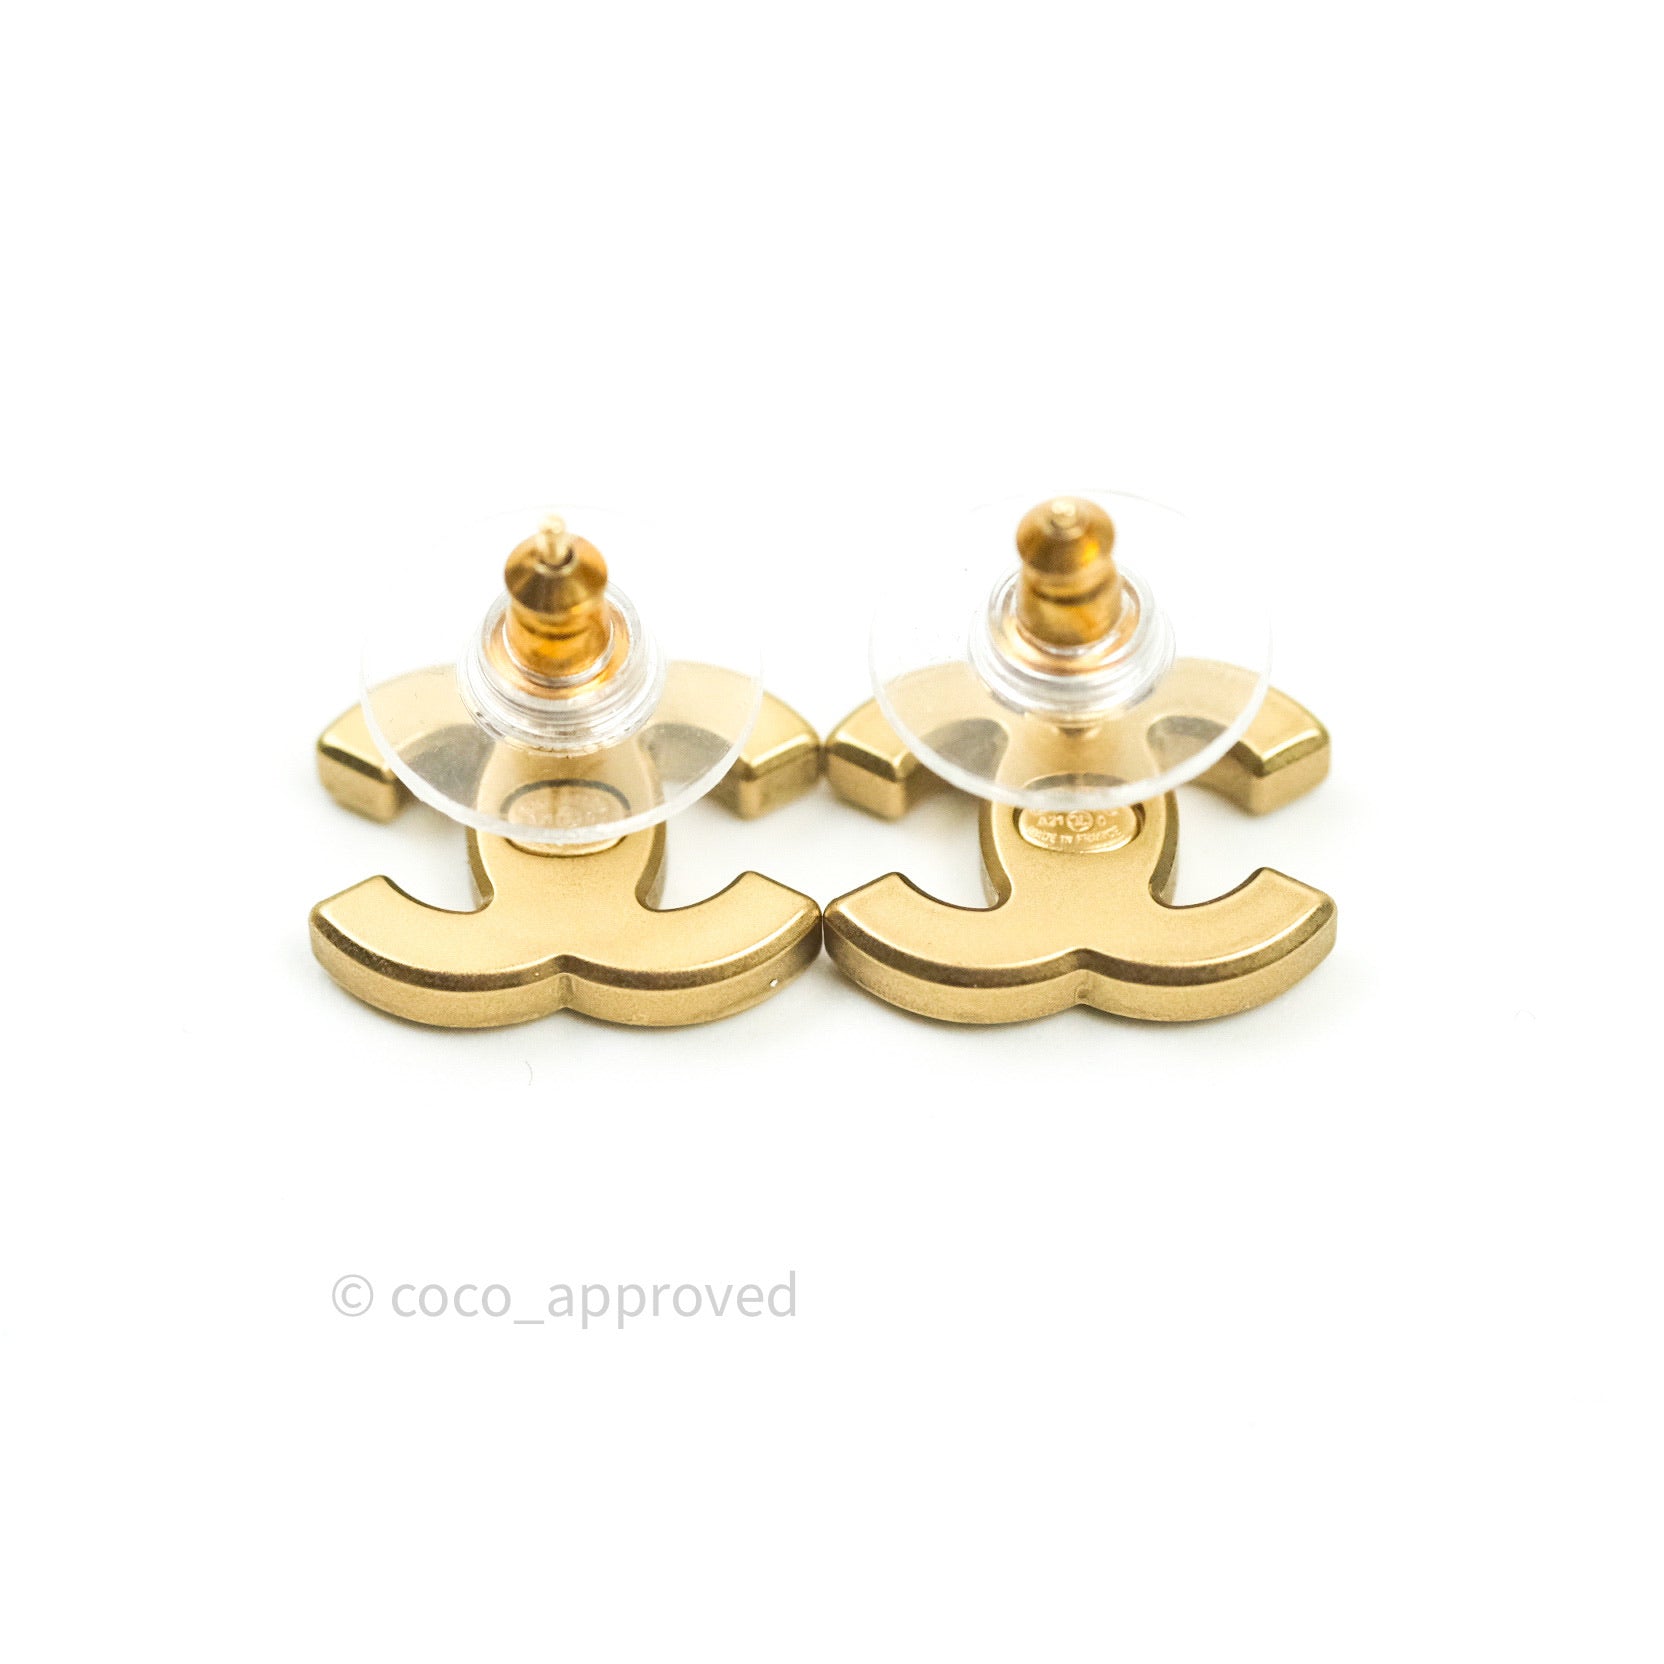 Chanel Black Leather Square CC Earrings Gold Tone 23S – Coco Approved Studio